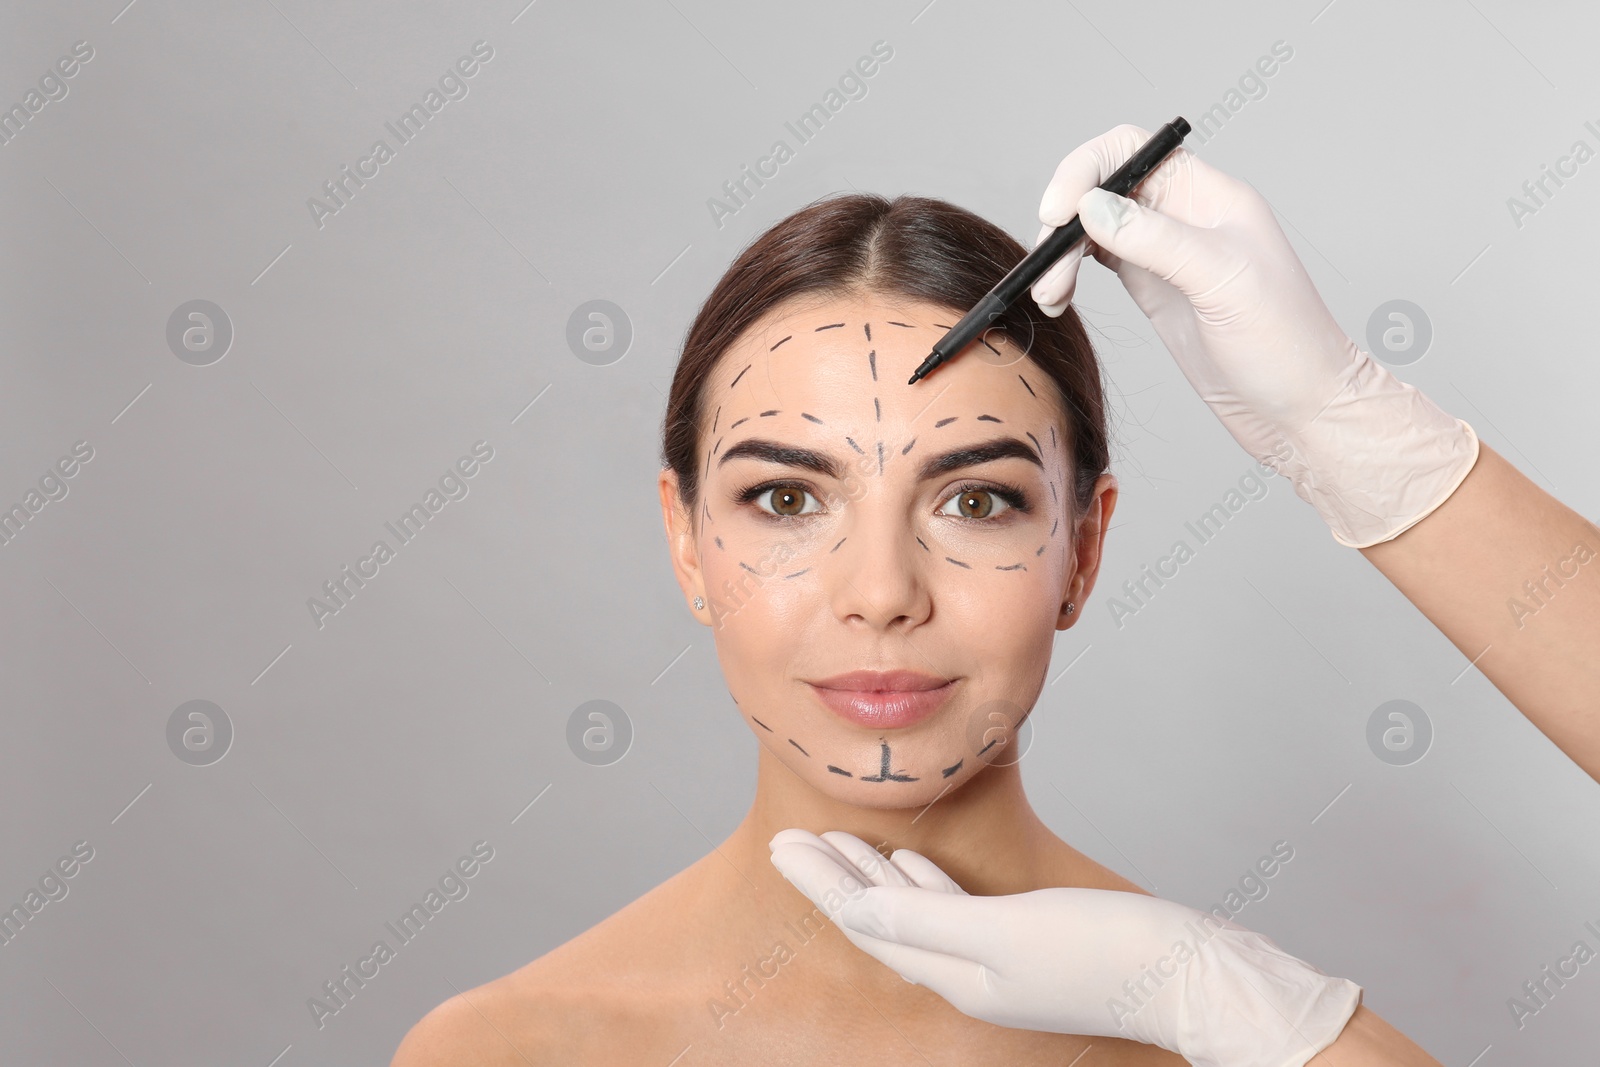 Photo of Doctor drawing marks on woman's face for cosmetic surgery operation against grey background